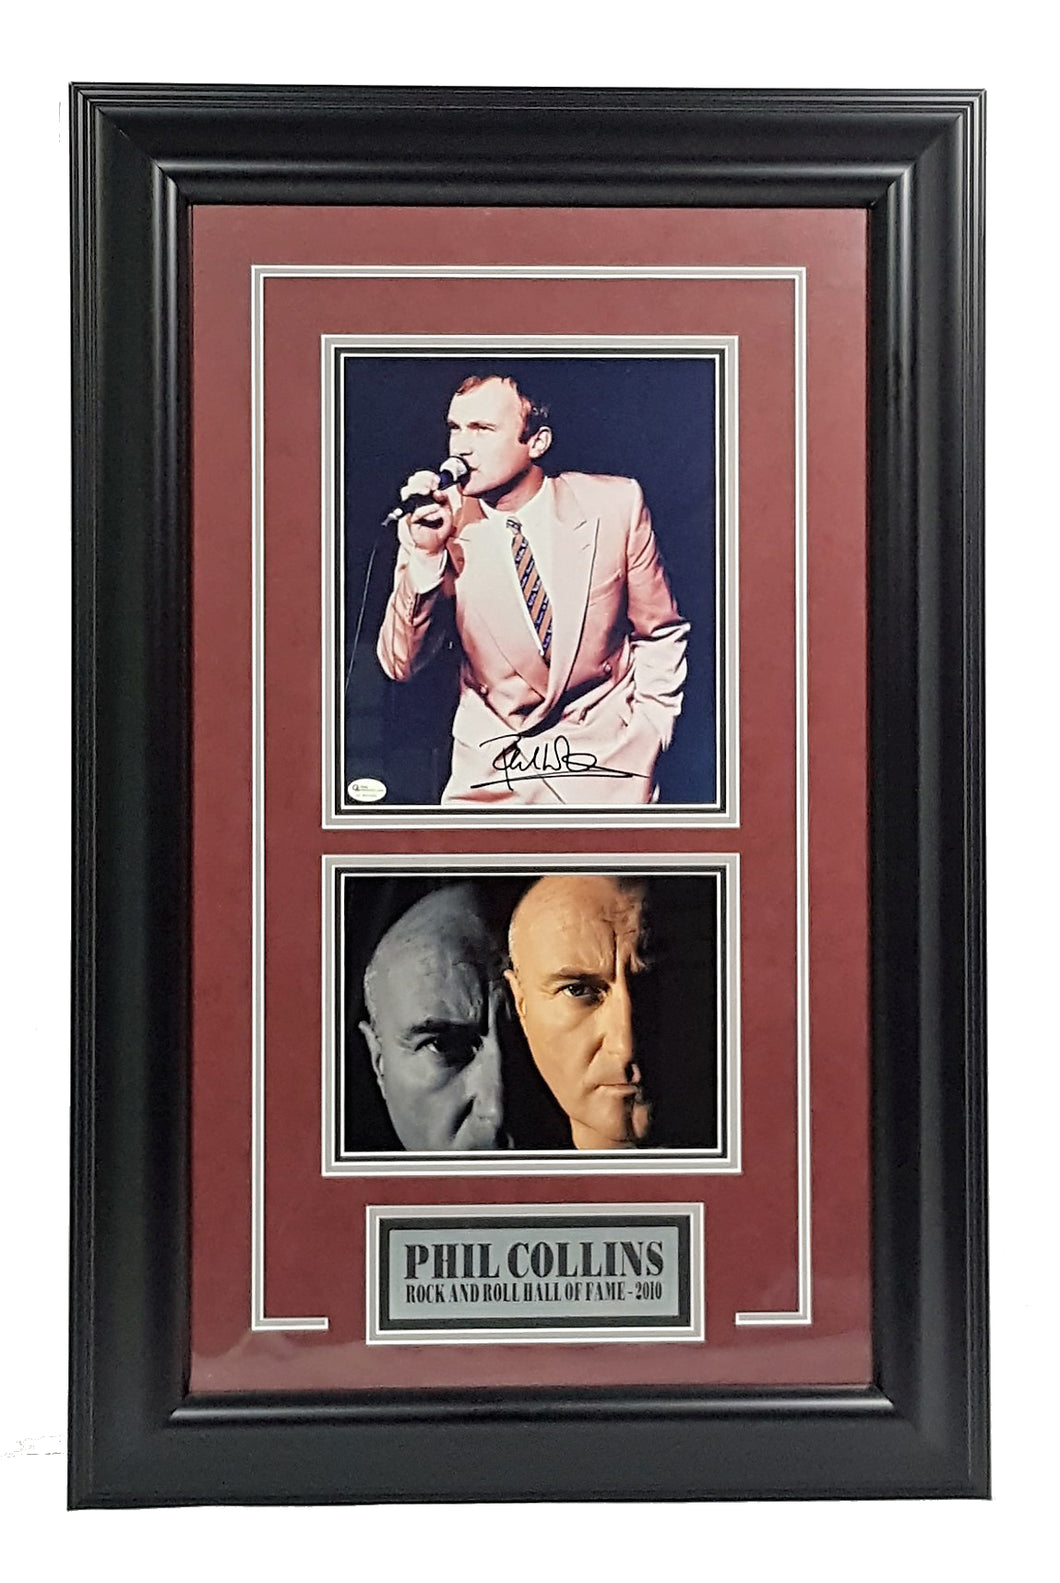 Phil Collins Autographed 8x10 Framed